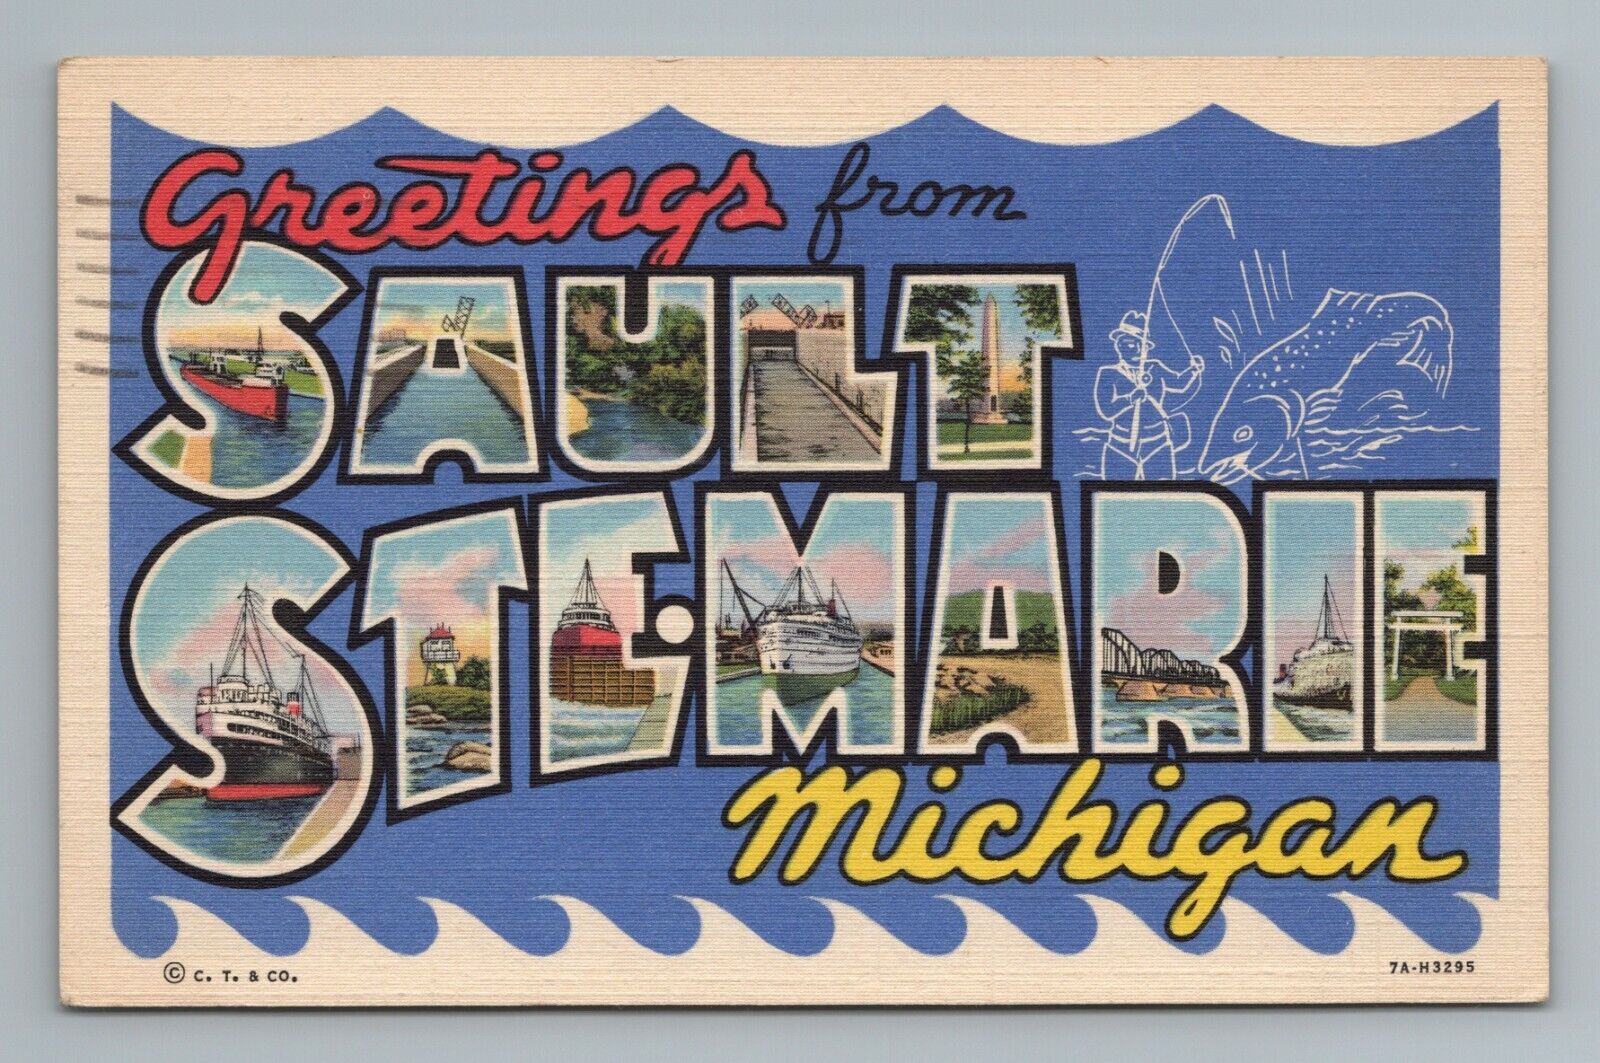 Greetings from Sault Ste Marie Large Letter Michigan Vintage Postcard